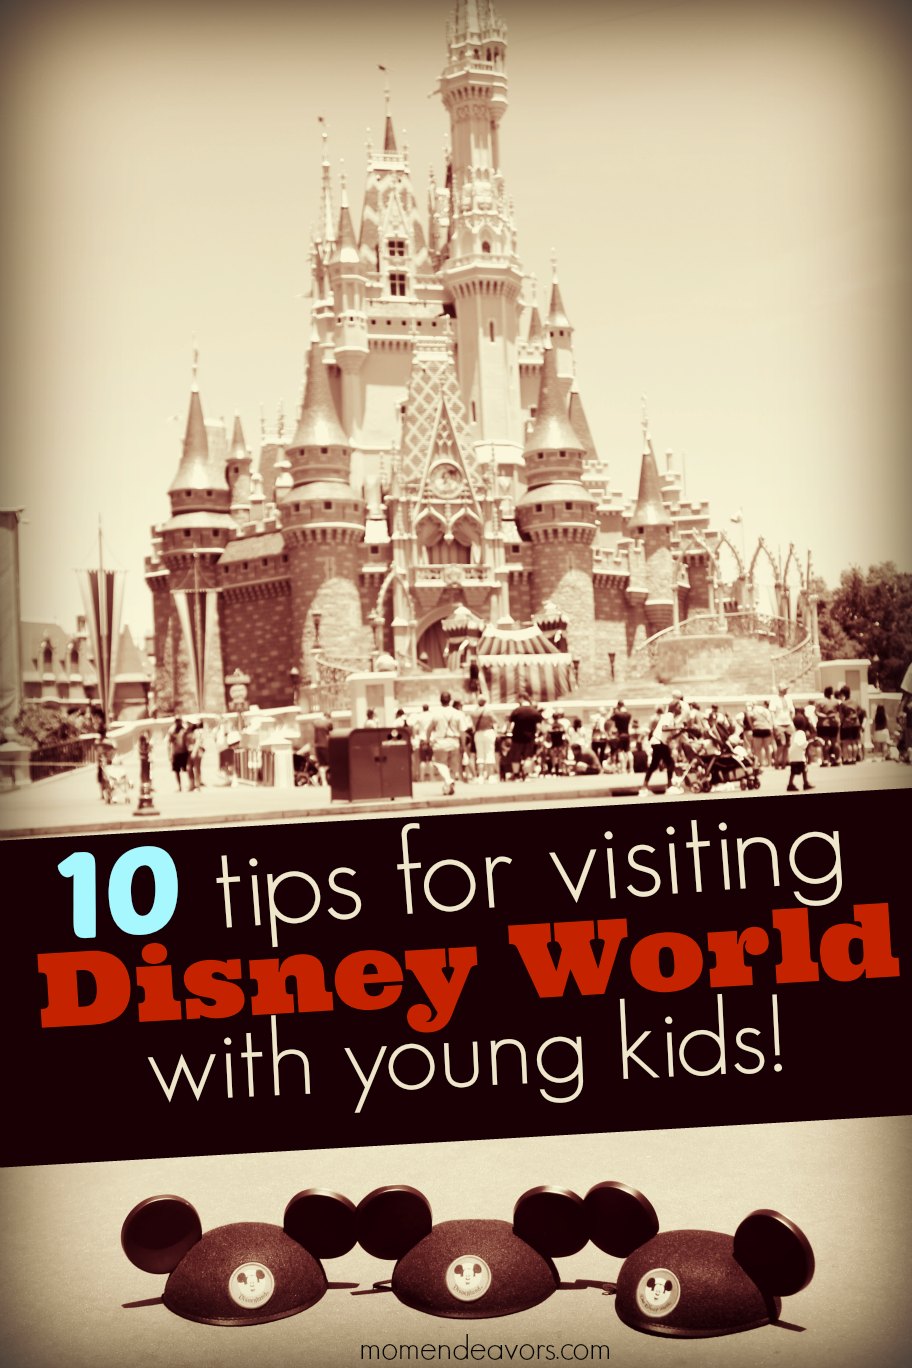 10 tips for visiting Disney World with young kids